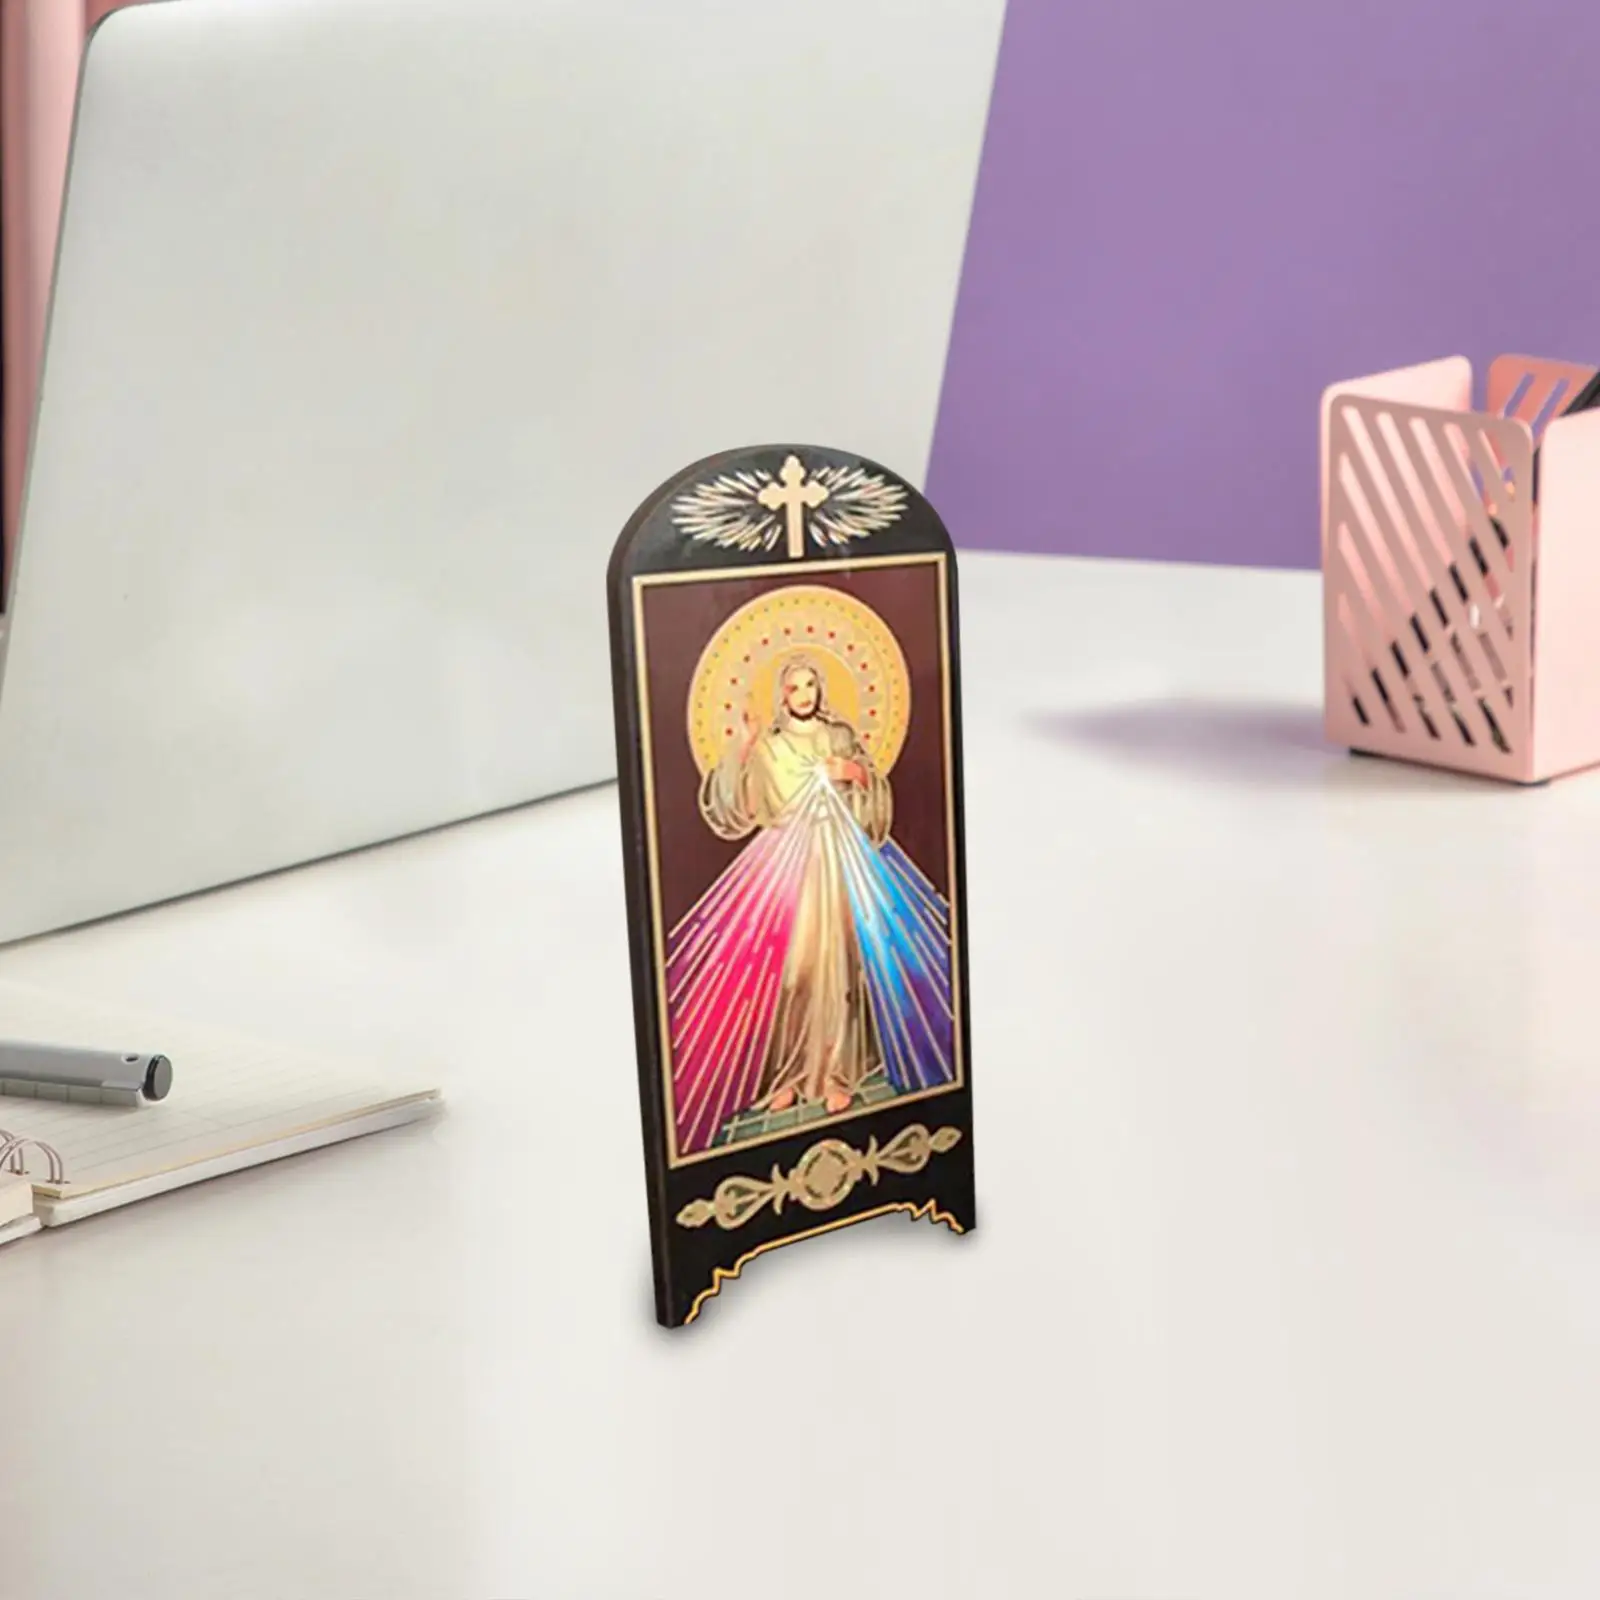 Foldable Mini Screens Ornament Religious Gifts Small Holy Figure Screens Arts Mini Room Dividers Panel for Bedroom Indoor Decor